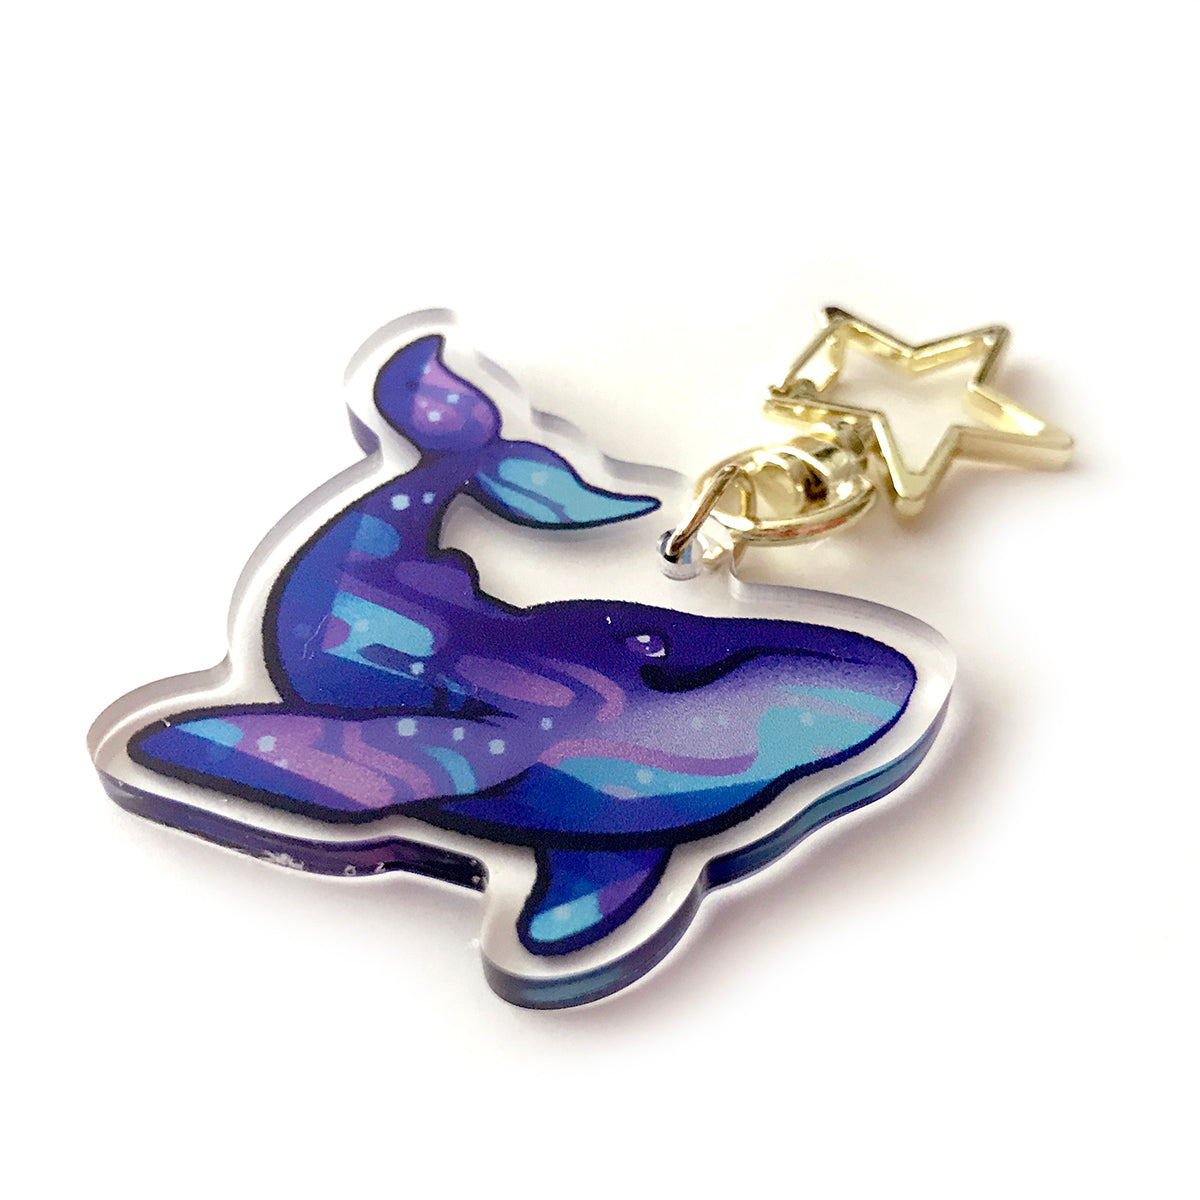 Milky Way Whale Keyring